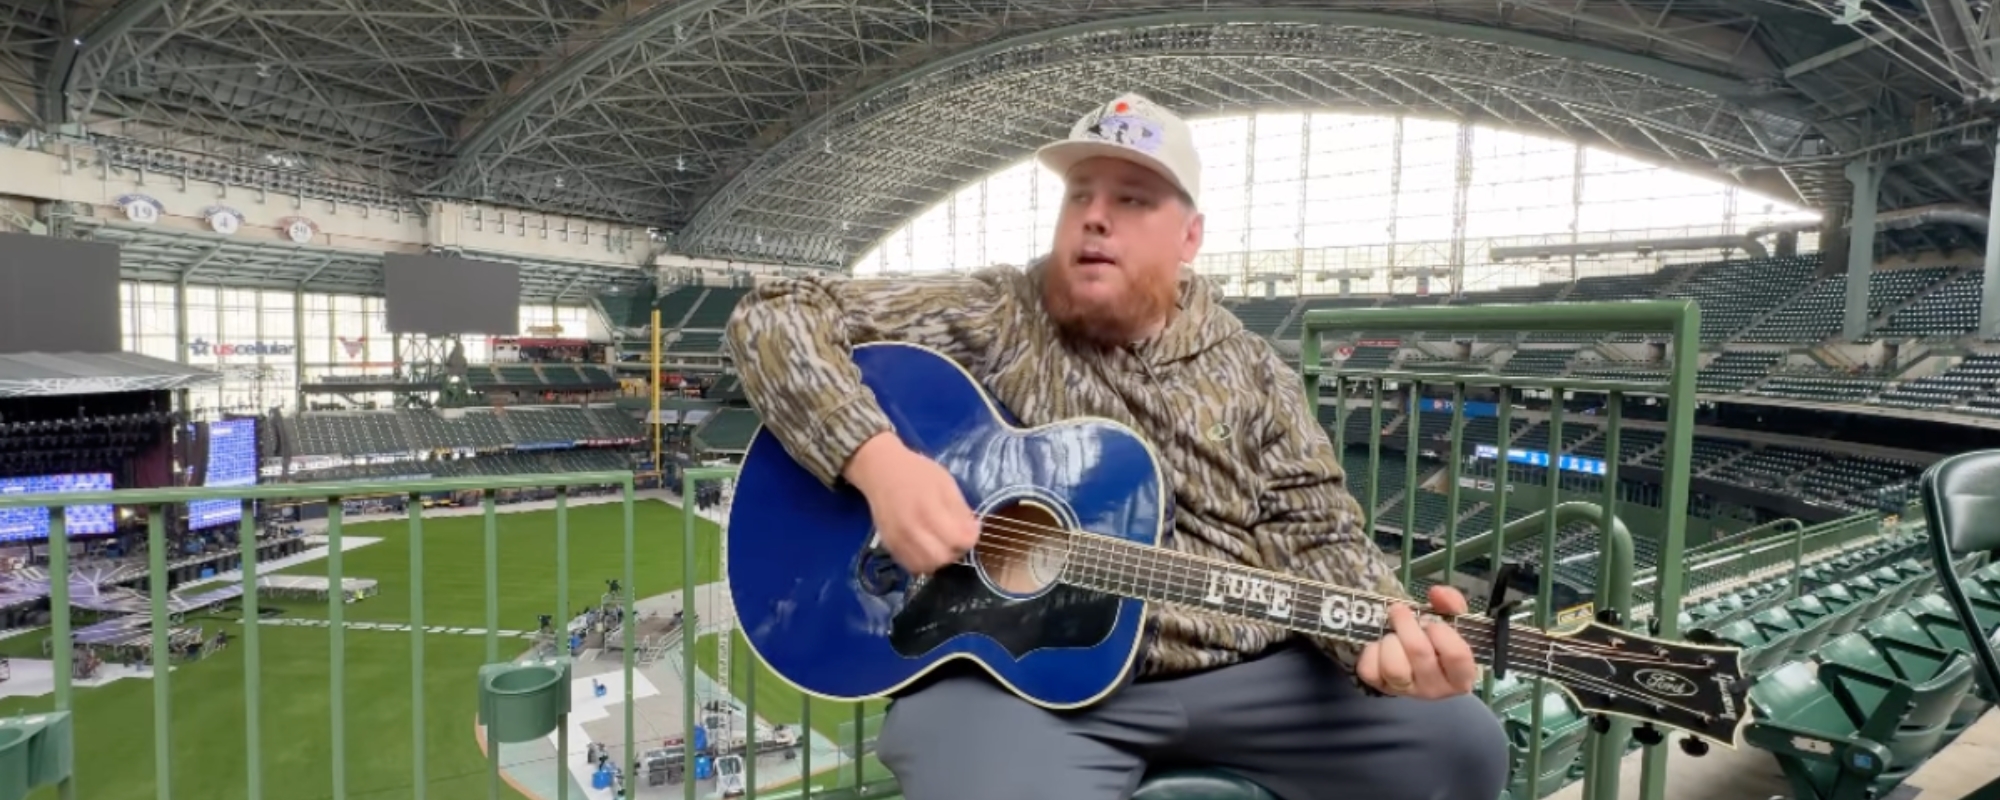 Luke Combs Brings All the Feels in New Song “Take Me Out to the Ballgame”